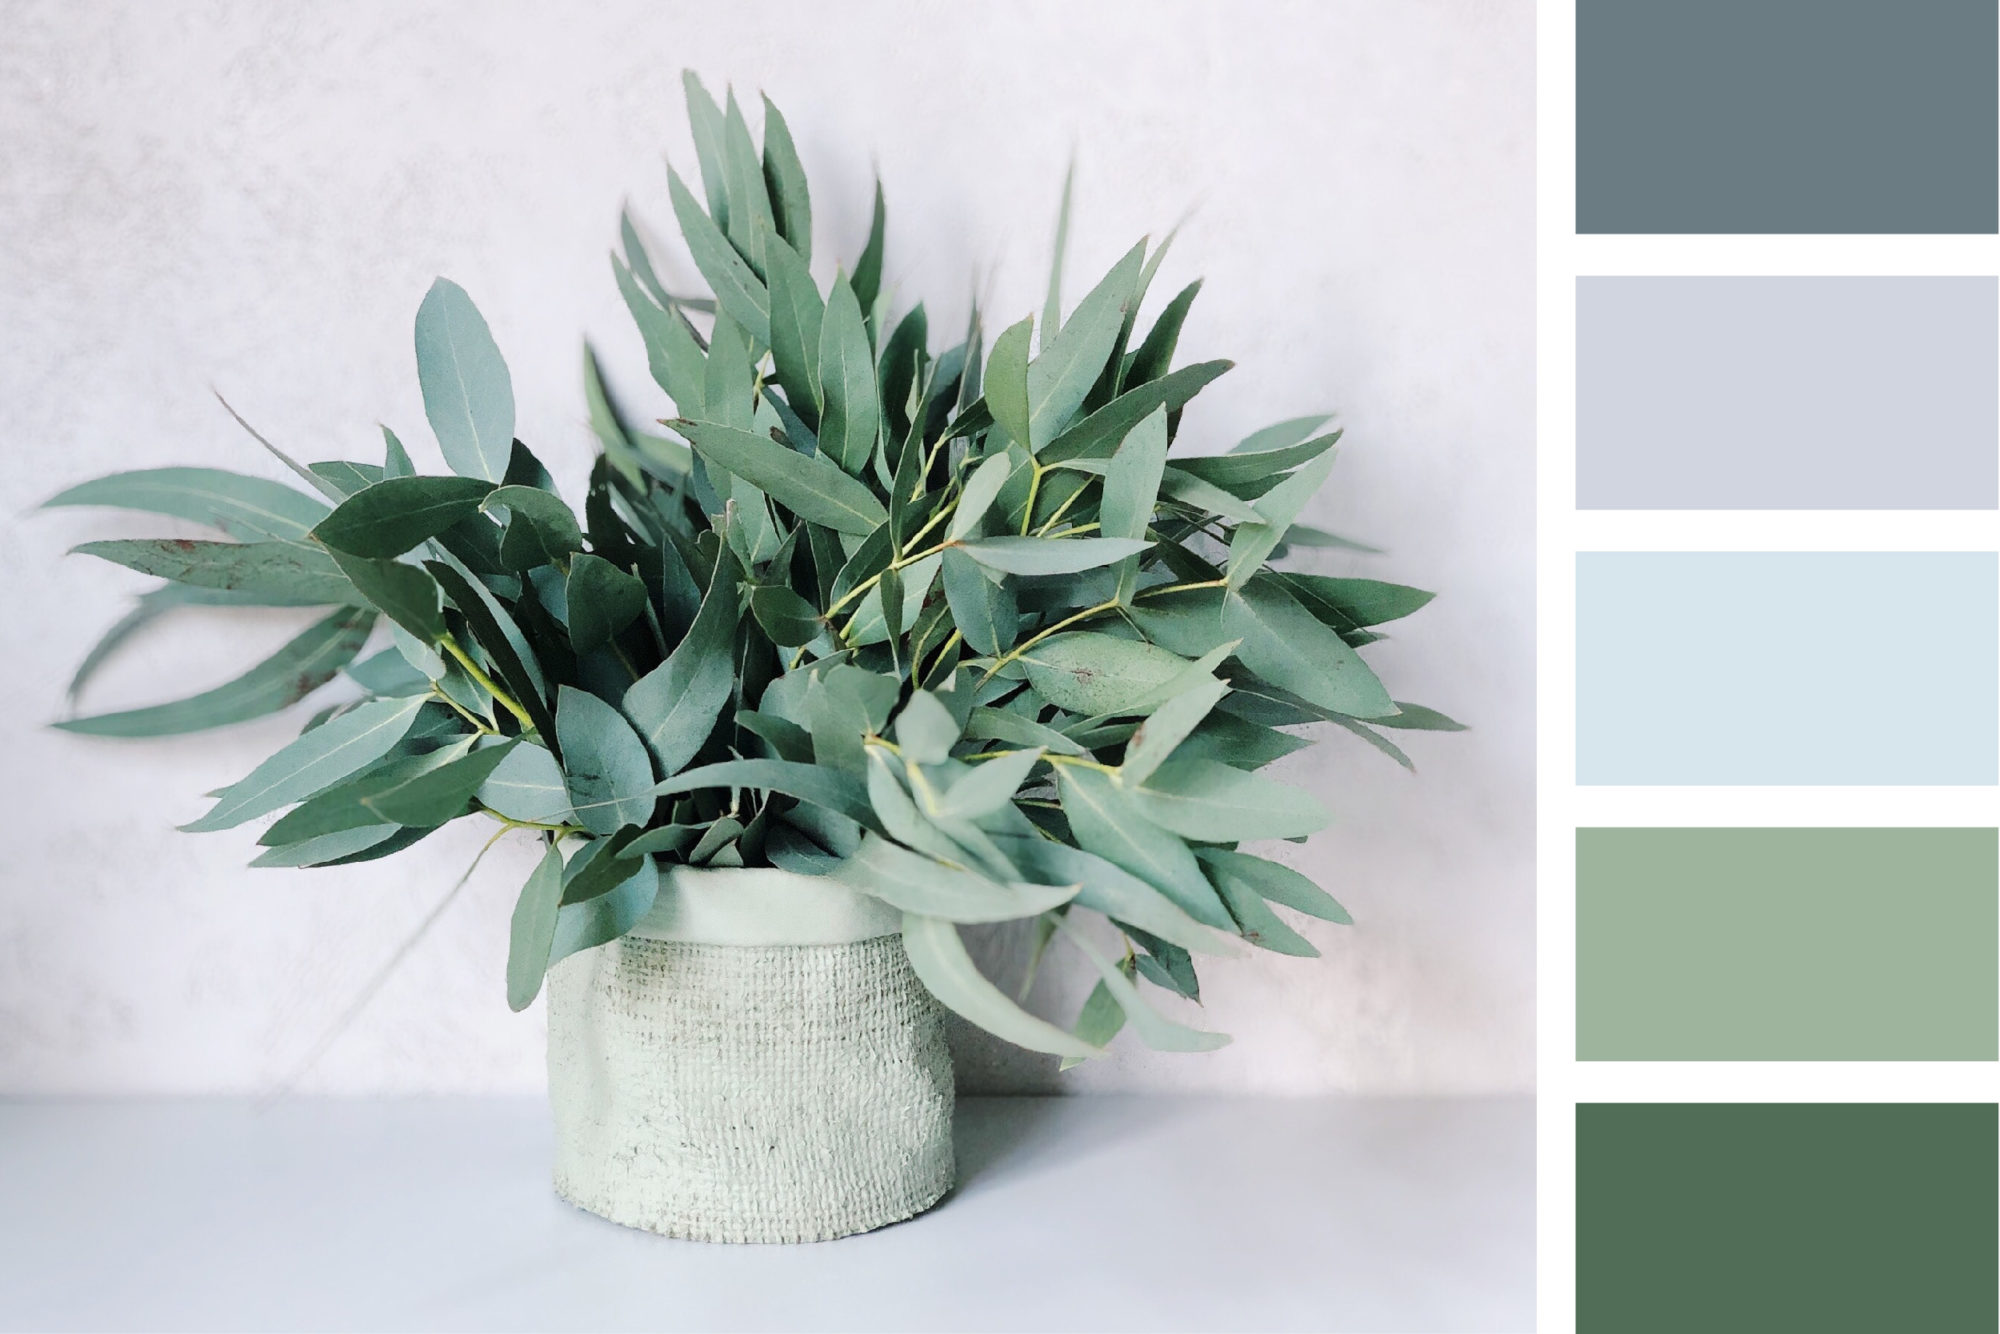 A green, gray, and blue palette inspired by eucalyptus and mint